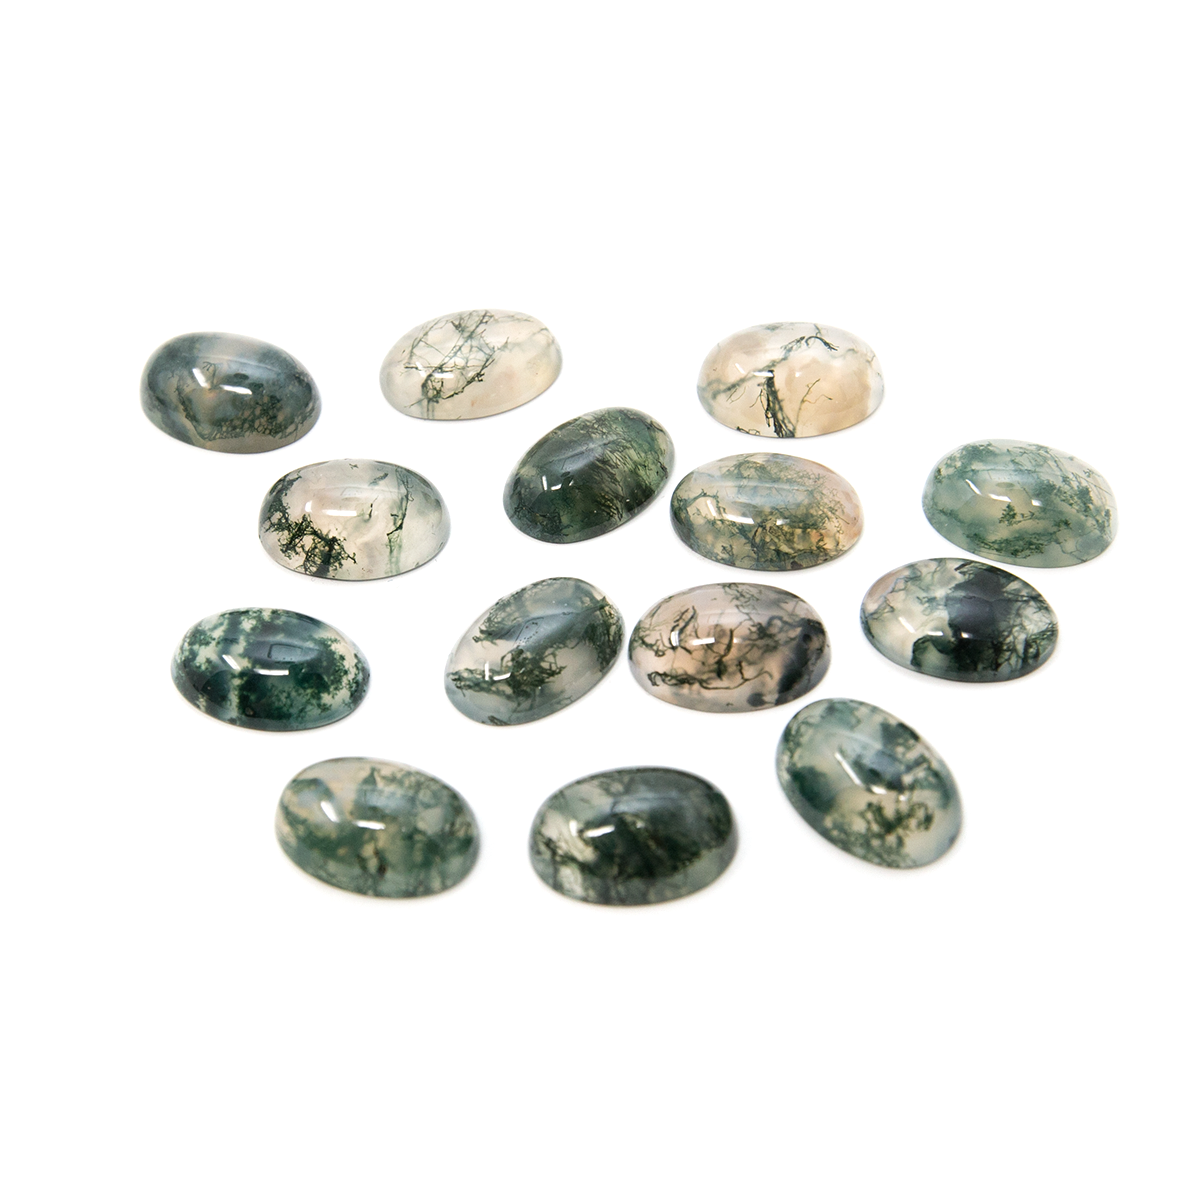 Moss Agate - Know Information About